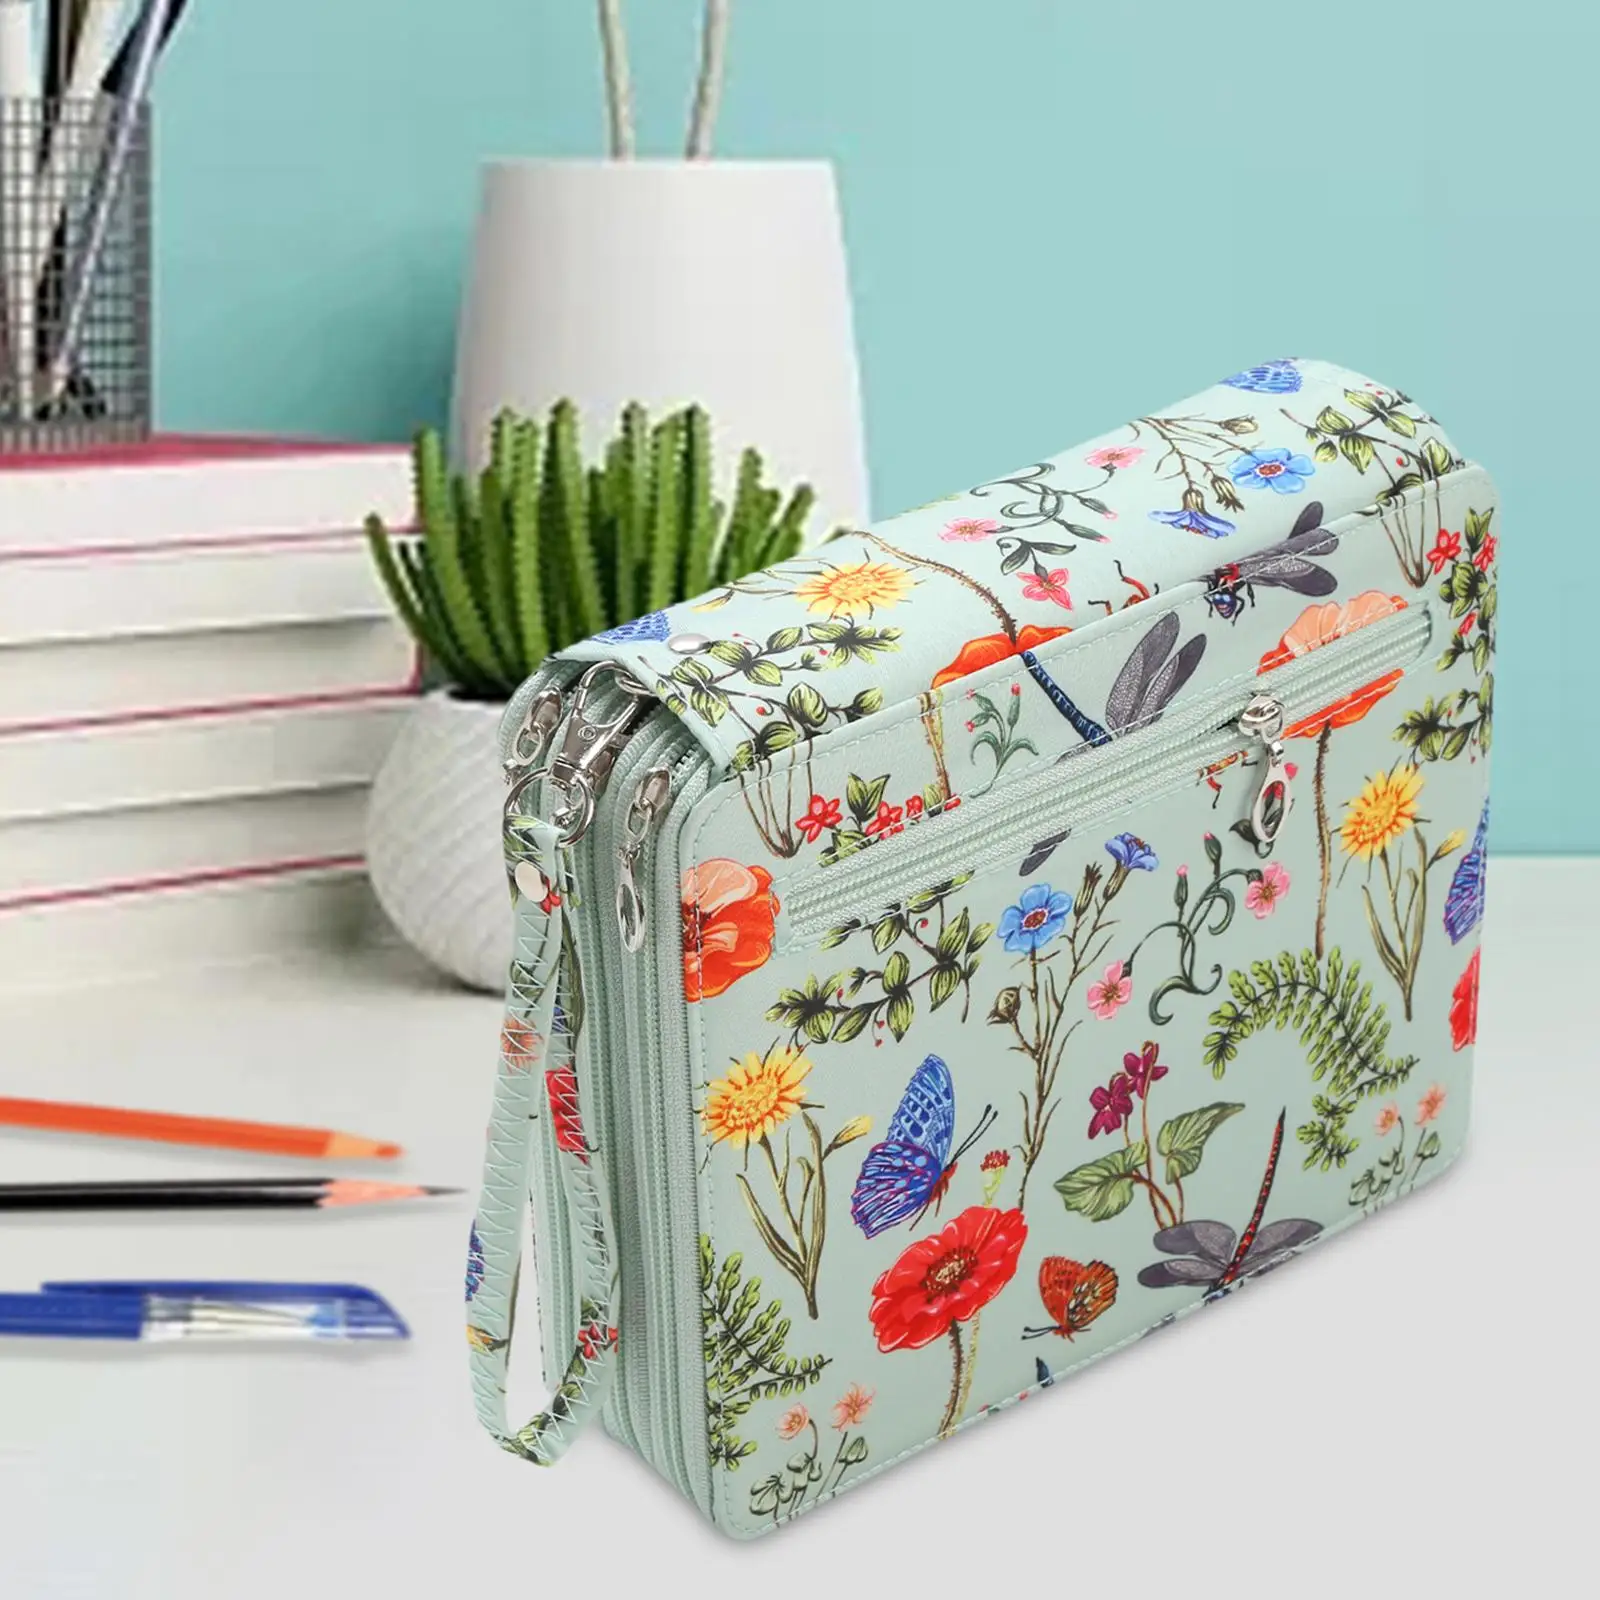 Watercolor Bag 120 Slot Storage Colored Pencil Case for Travel School Adults